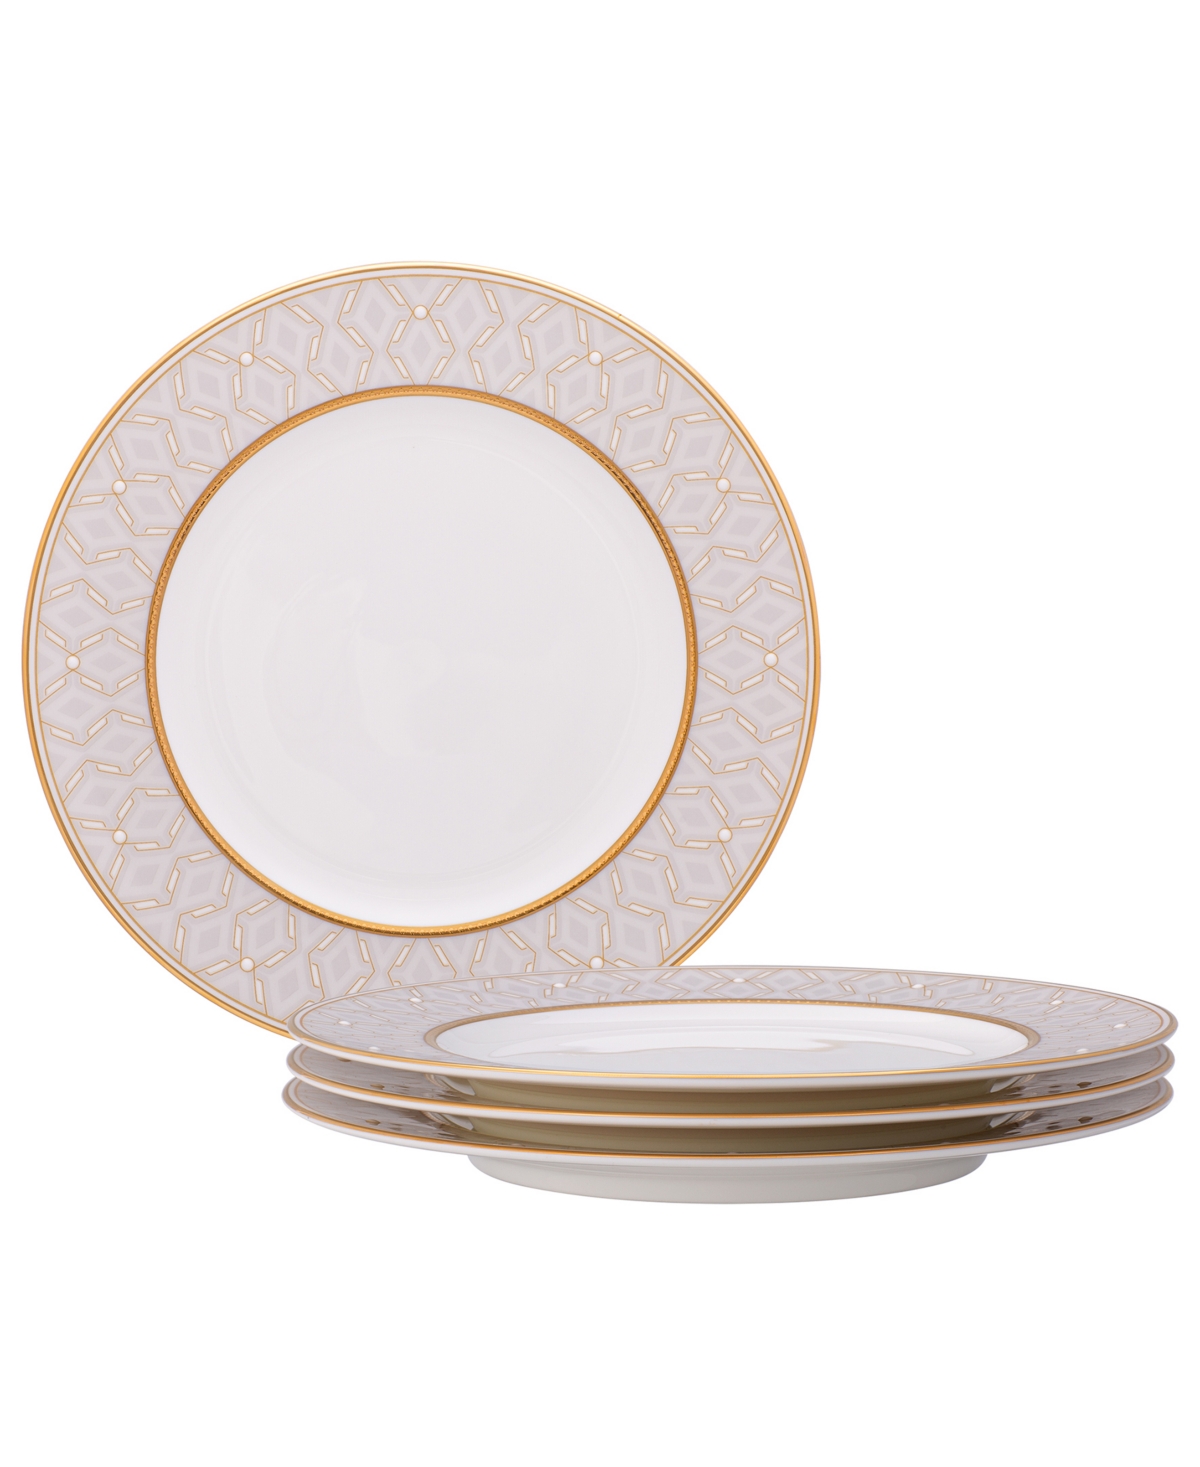 Noritake Noble Pearl Set Of 4 Salad Plates, 8-1/2" In White And Gold